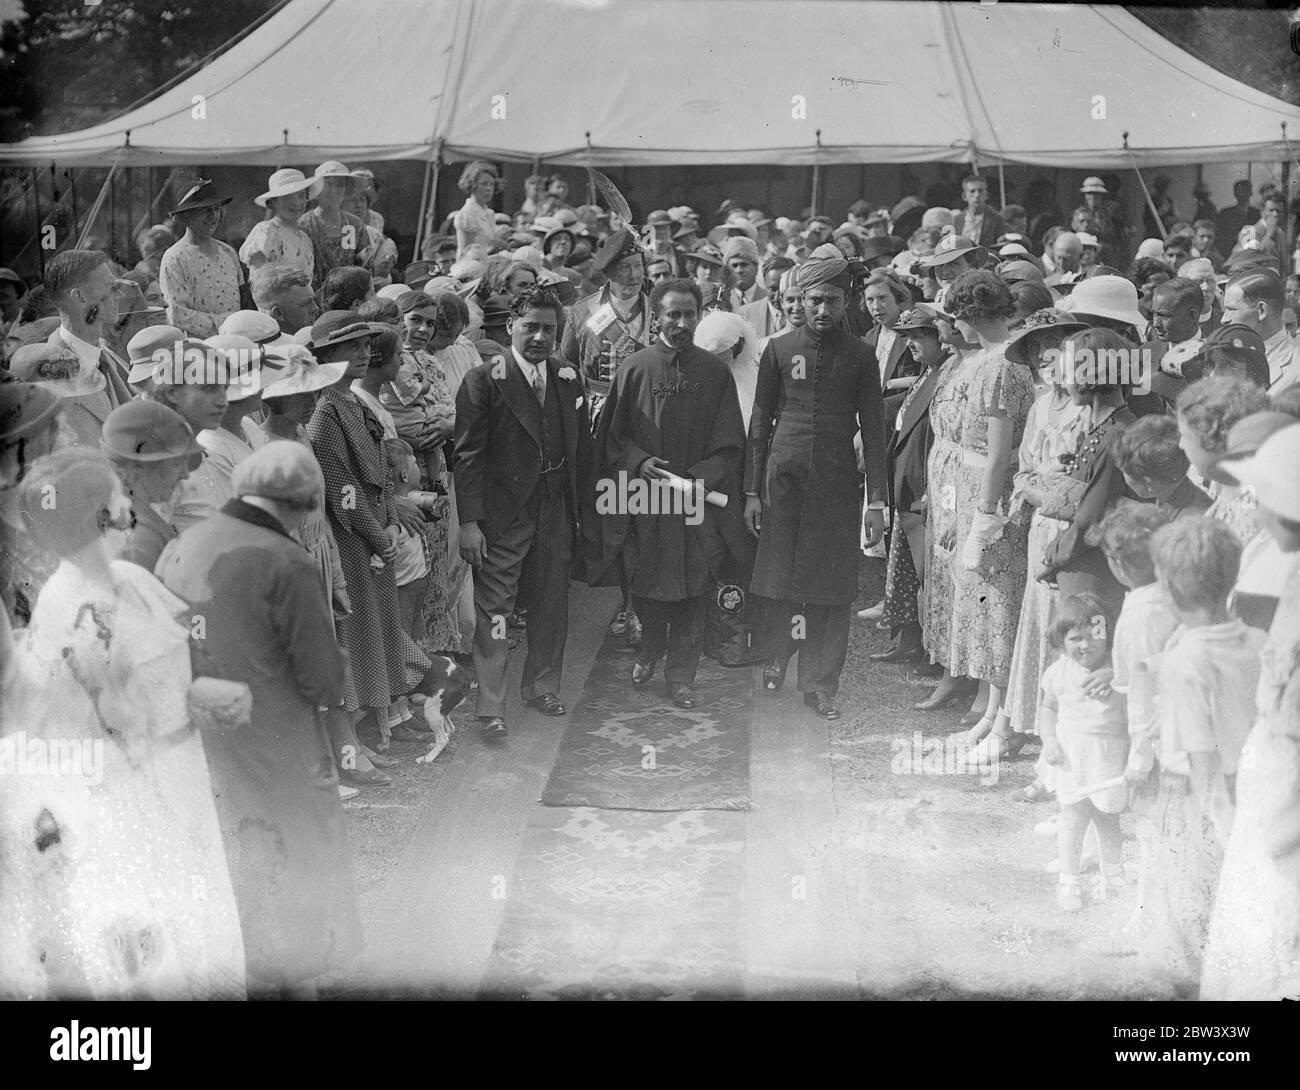 Emperor Haile Selassie of Ethiopia and members of his family and suite visited the Woking Mosque ( Surrey ) from Bath . The Moslem community gave an address of welcome , and Indian potentates were present . Photo shows : Emperor Haile Selassie leaving the Mosque after his visit . 25 Aug 1936 Original caption from negative The Shah Jahan Mosque was the first purpose built mosque in Europe outside of Muslim Spain Stock Photo